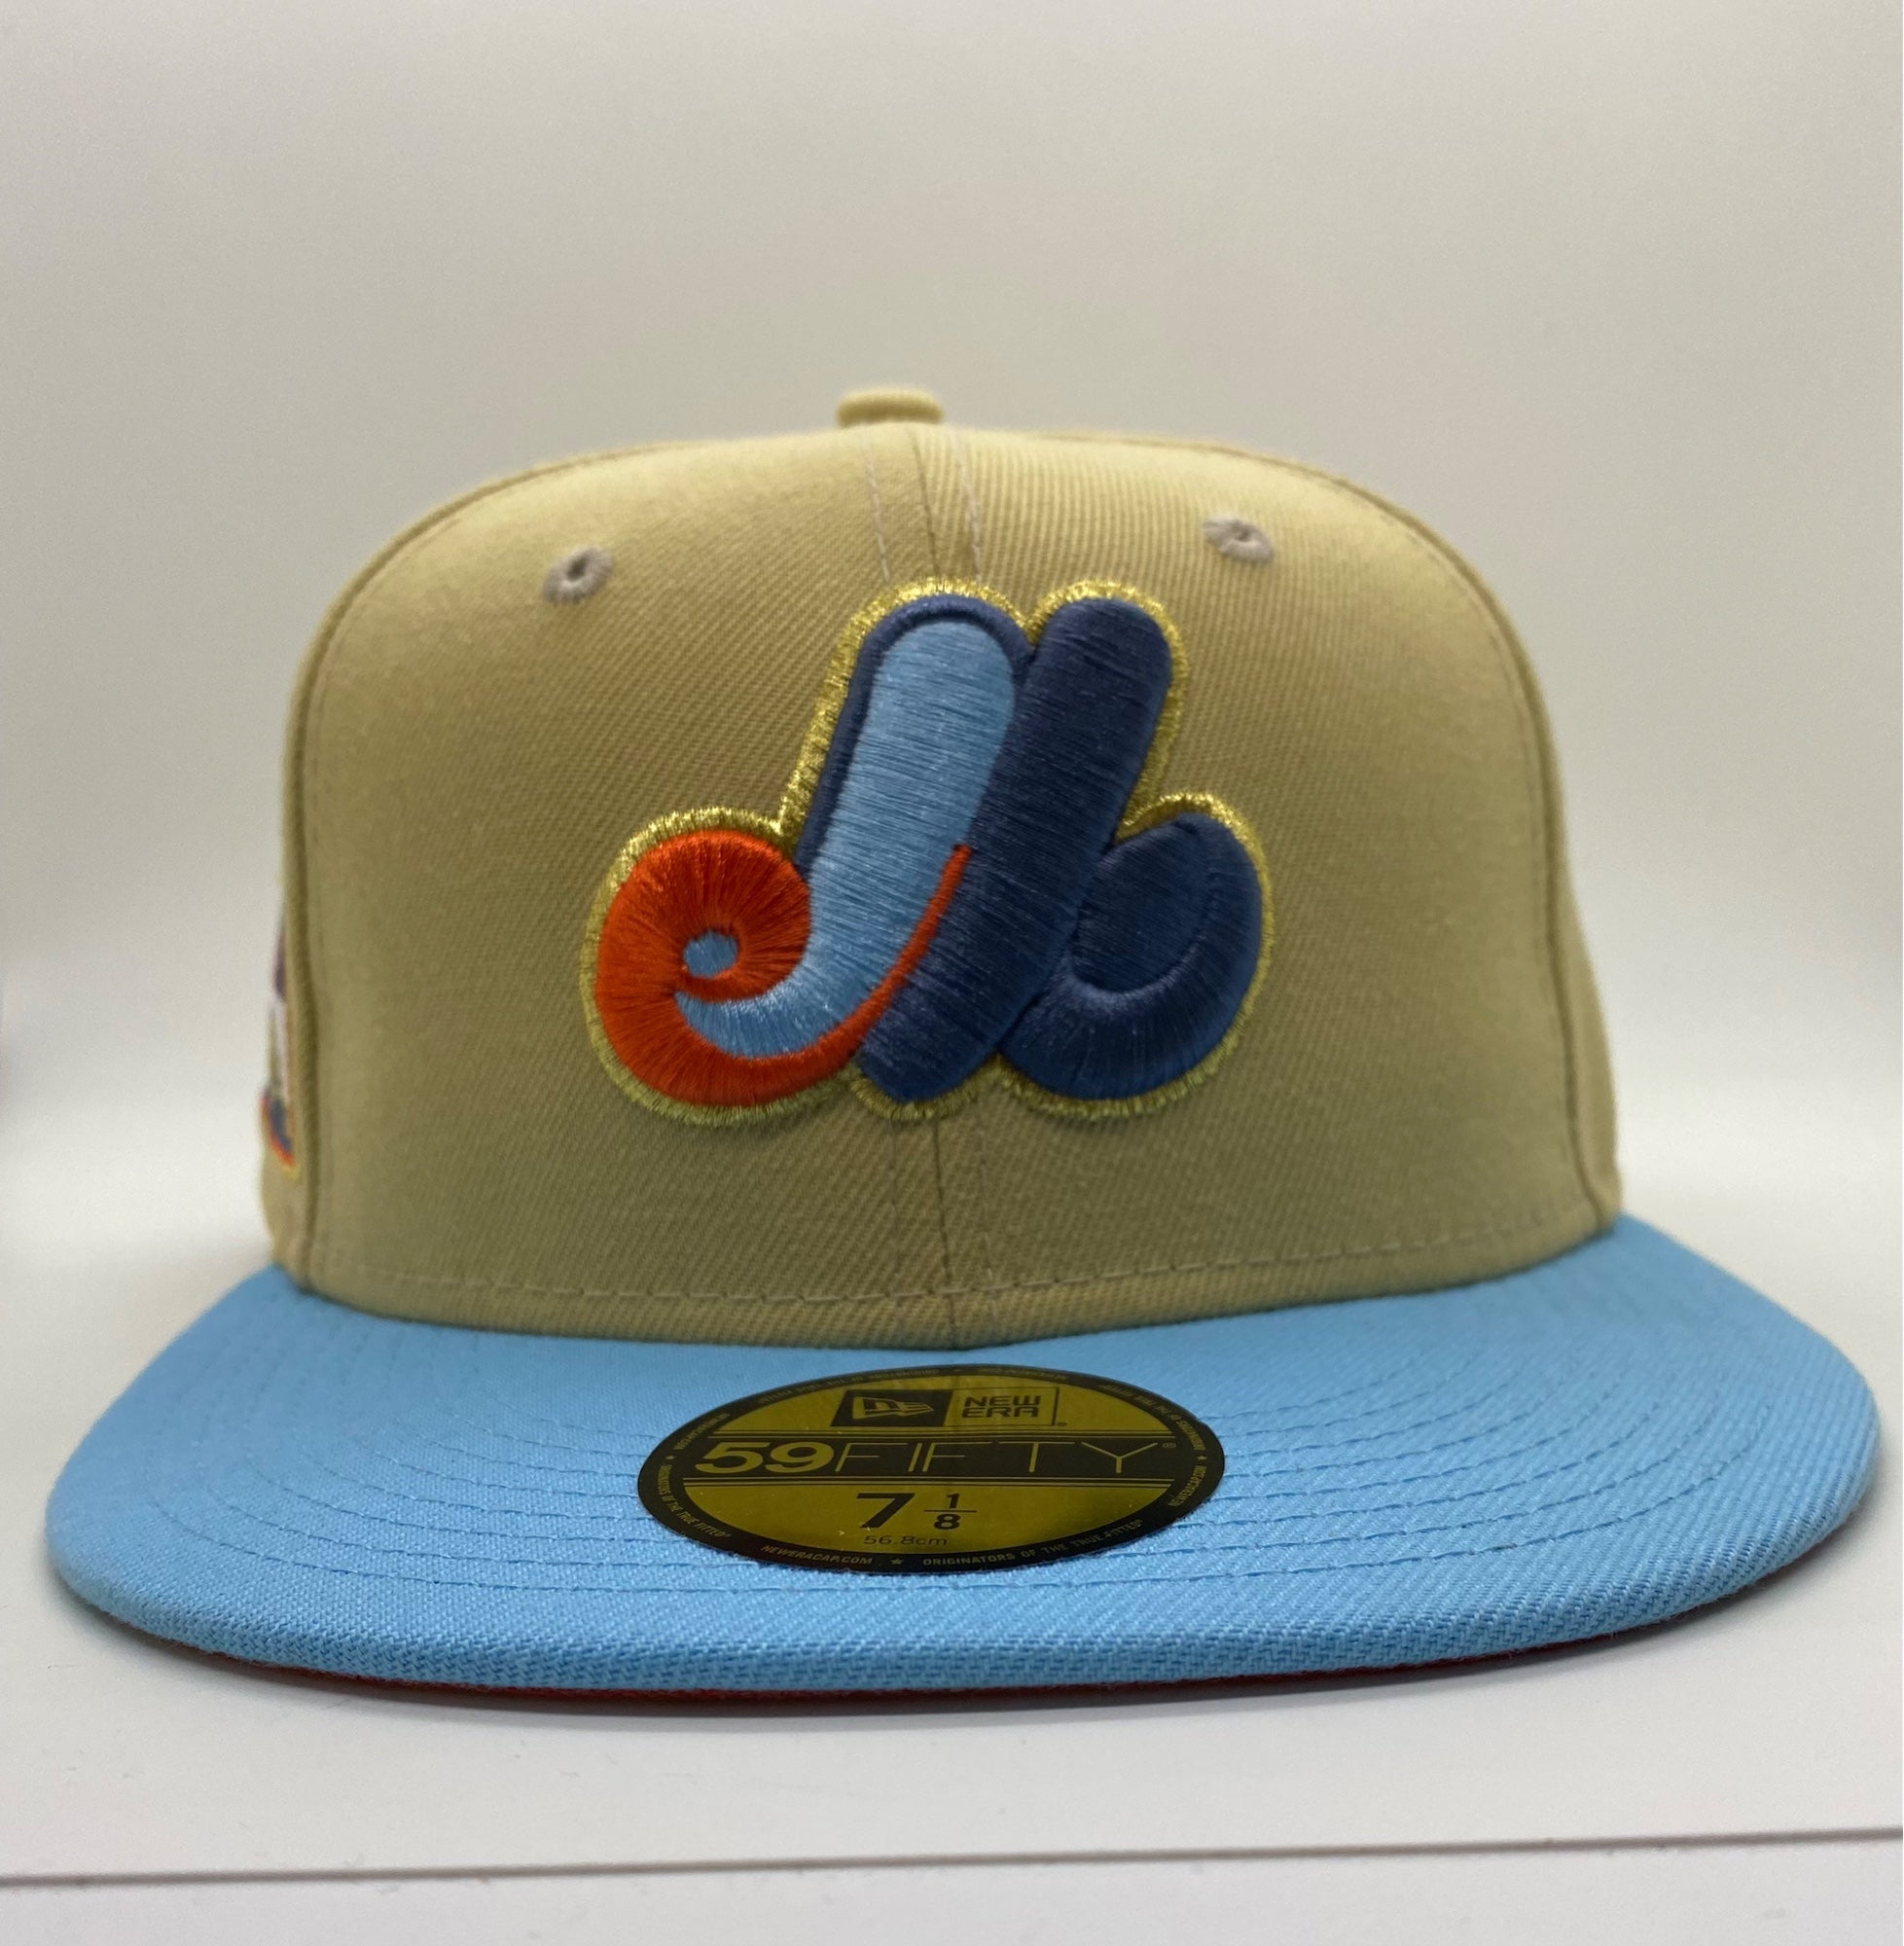 You can buy a 1994 Montreal Expos World Series Cap - NBC Sports